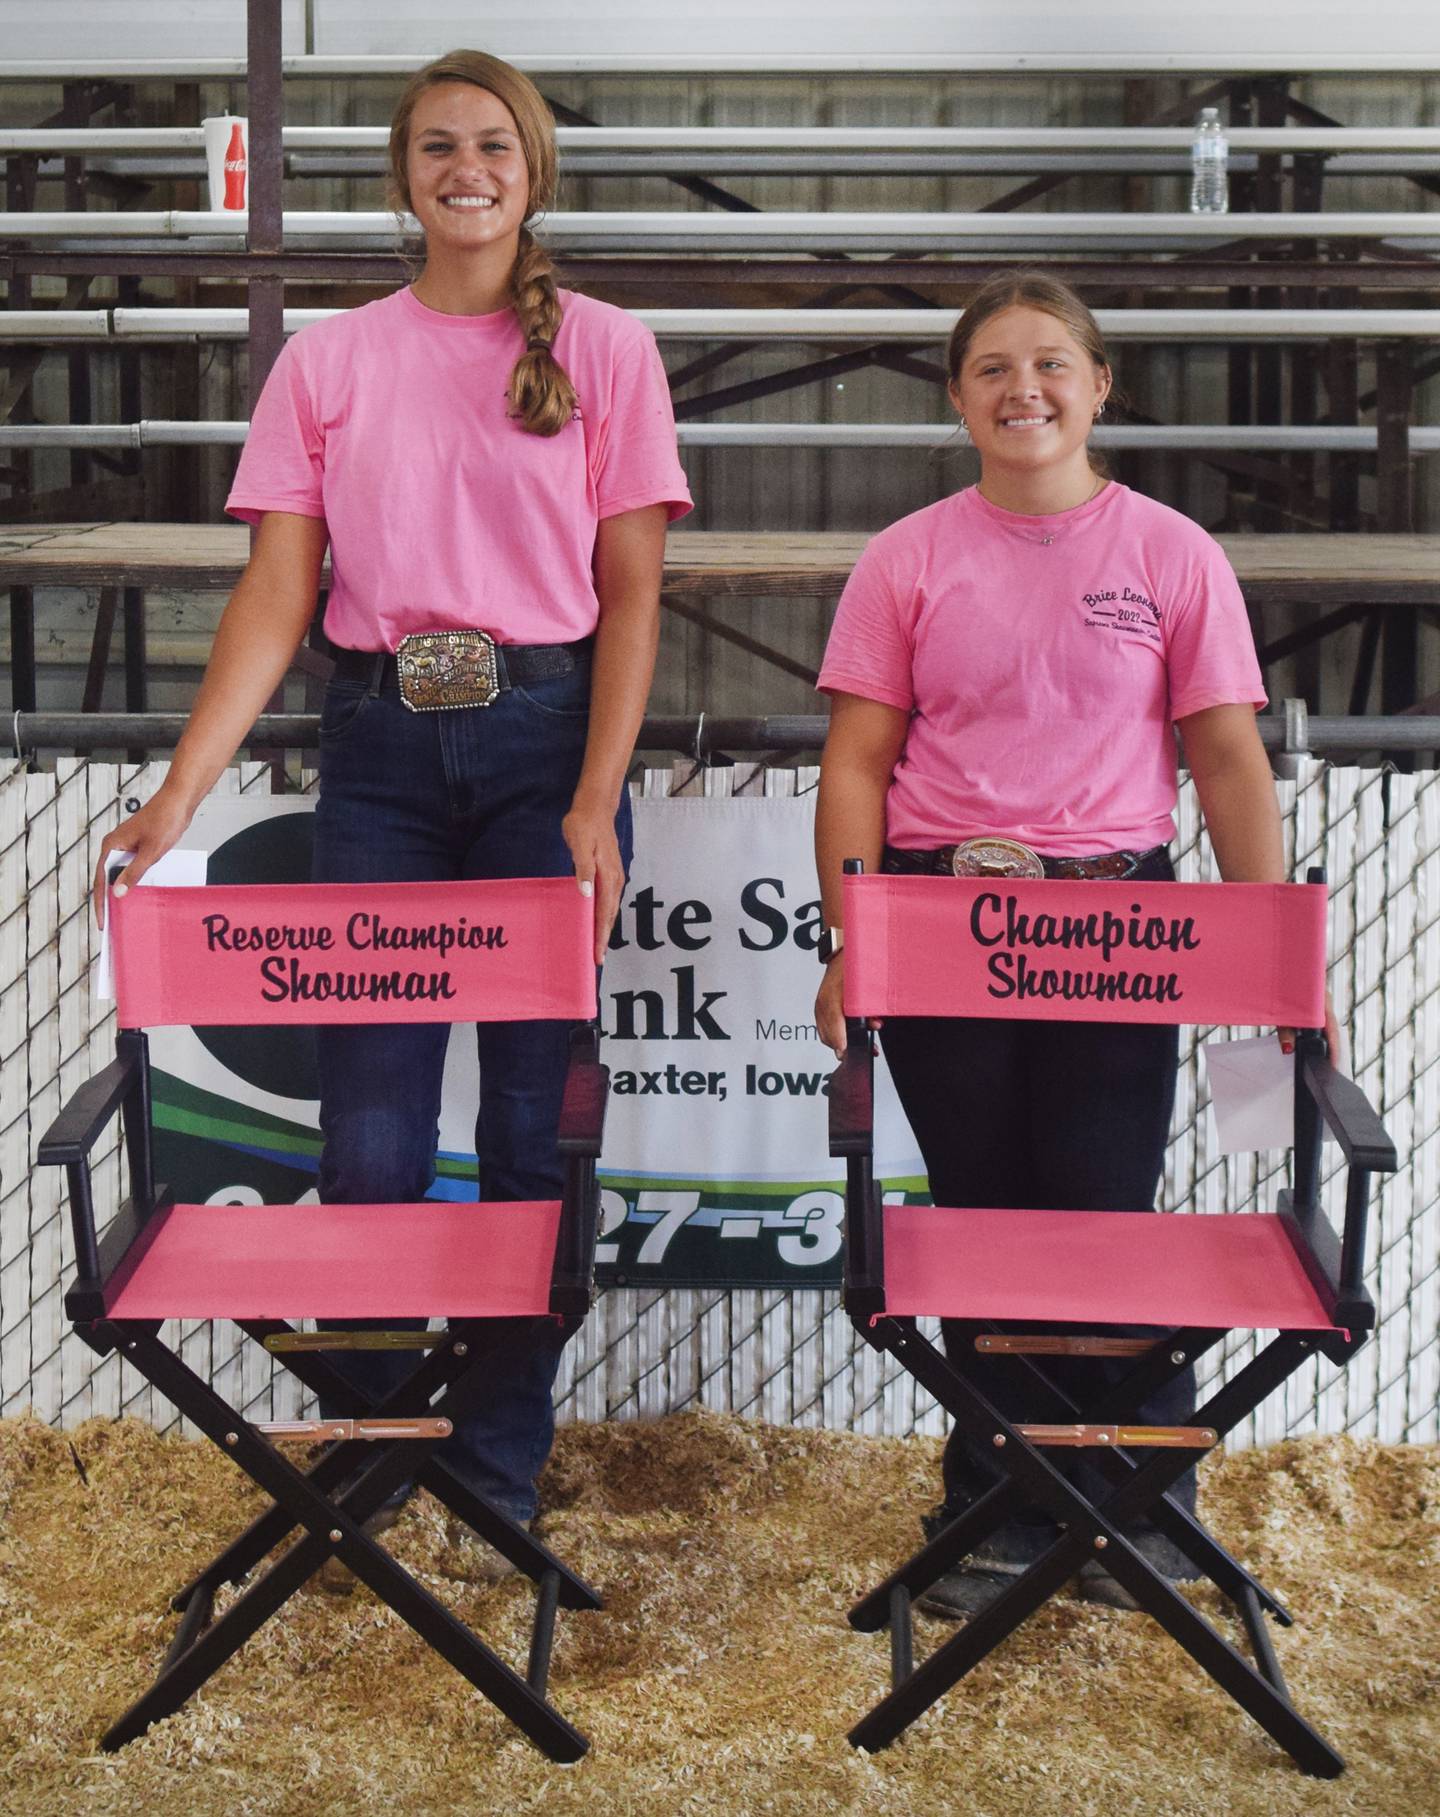 From left: Supreme Showmanship Reserve Champion Cadie Horn and Supreme Showmanship Champion Elise Engle pose for pictures after their win on July 21 at the Jasper County Fair.